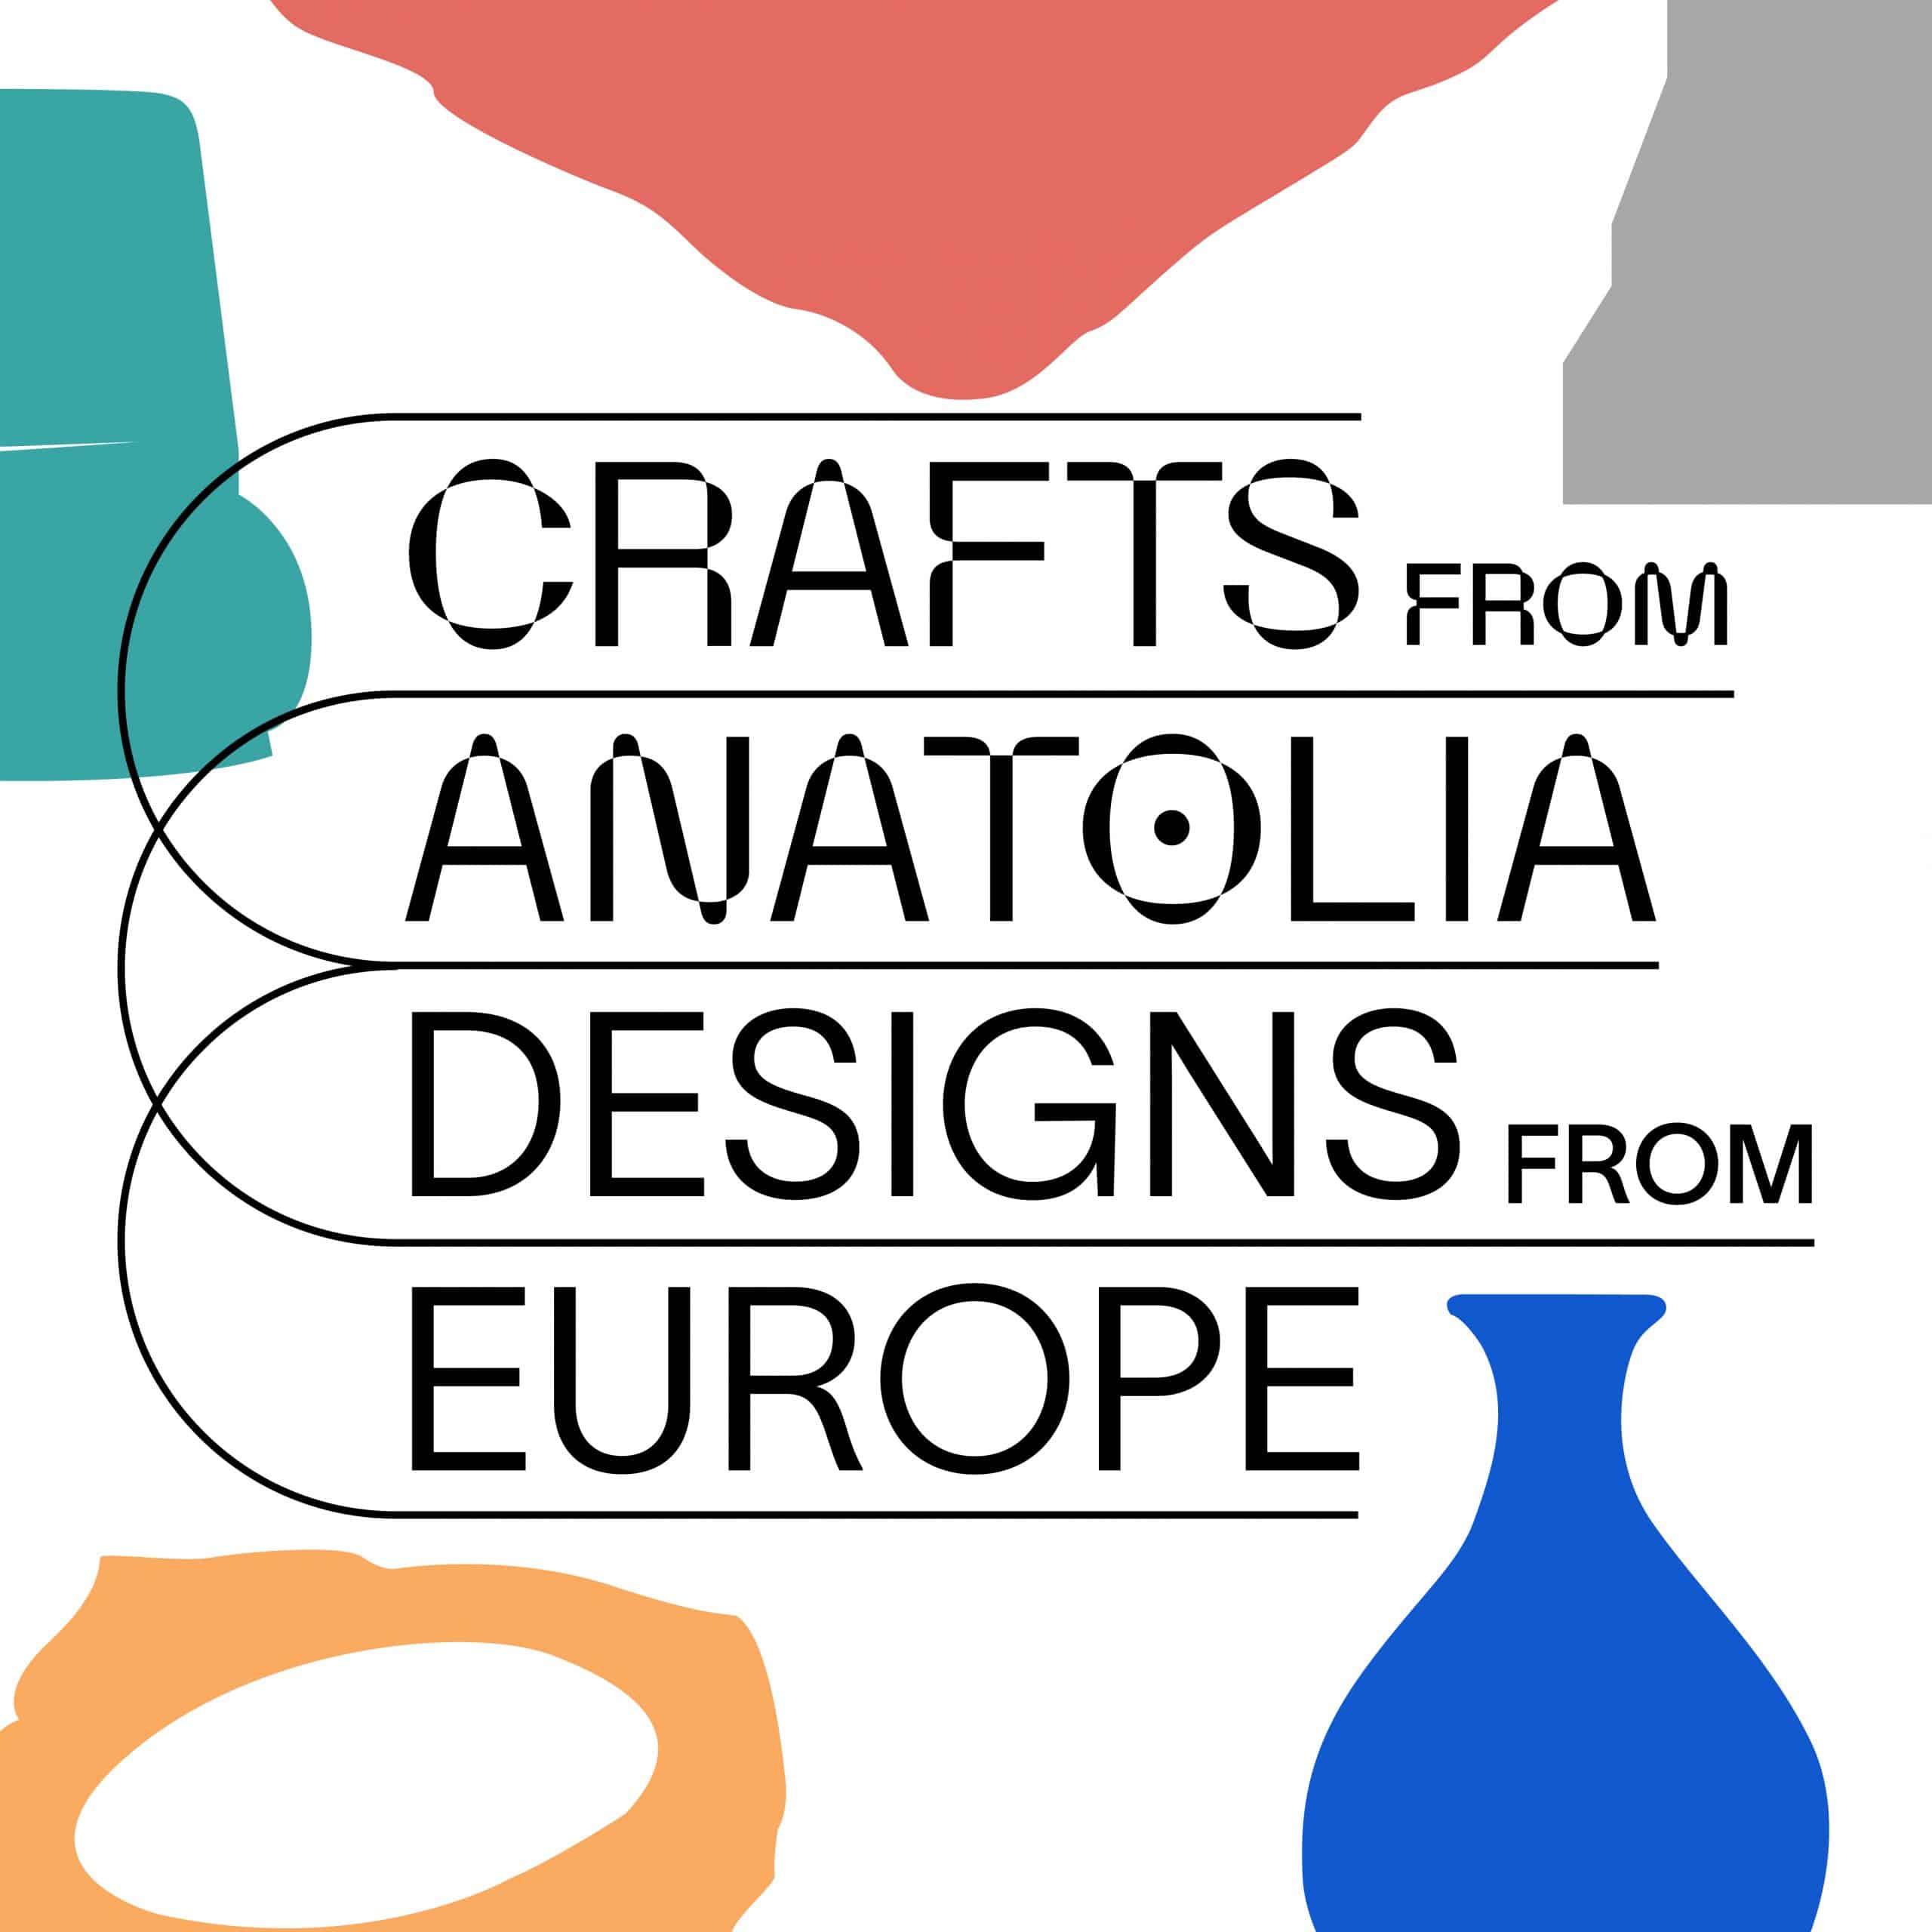 Crafts from Anatolia, Designs from Europe